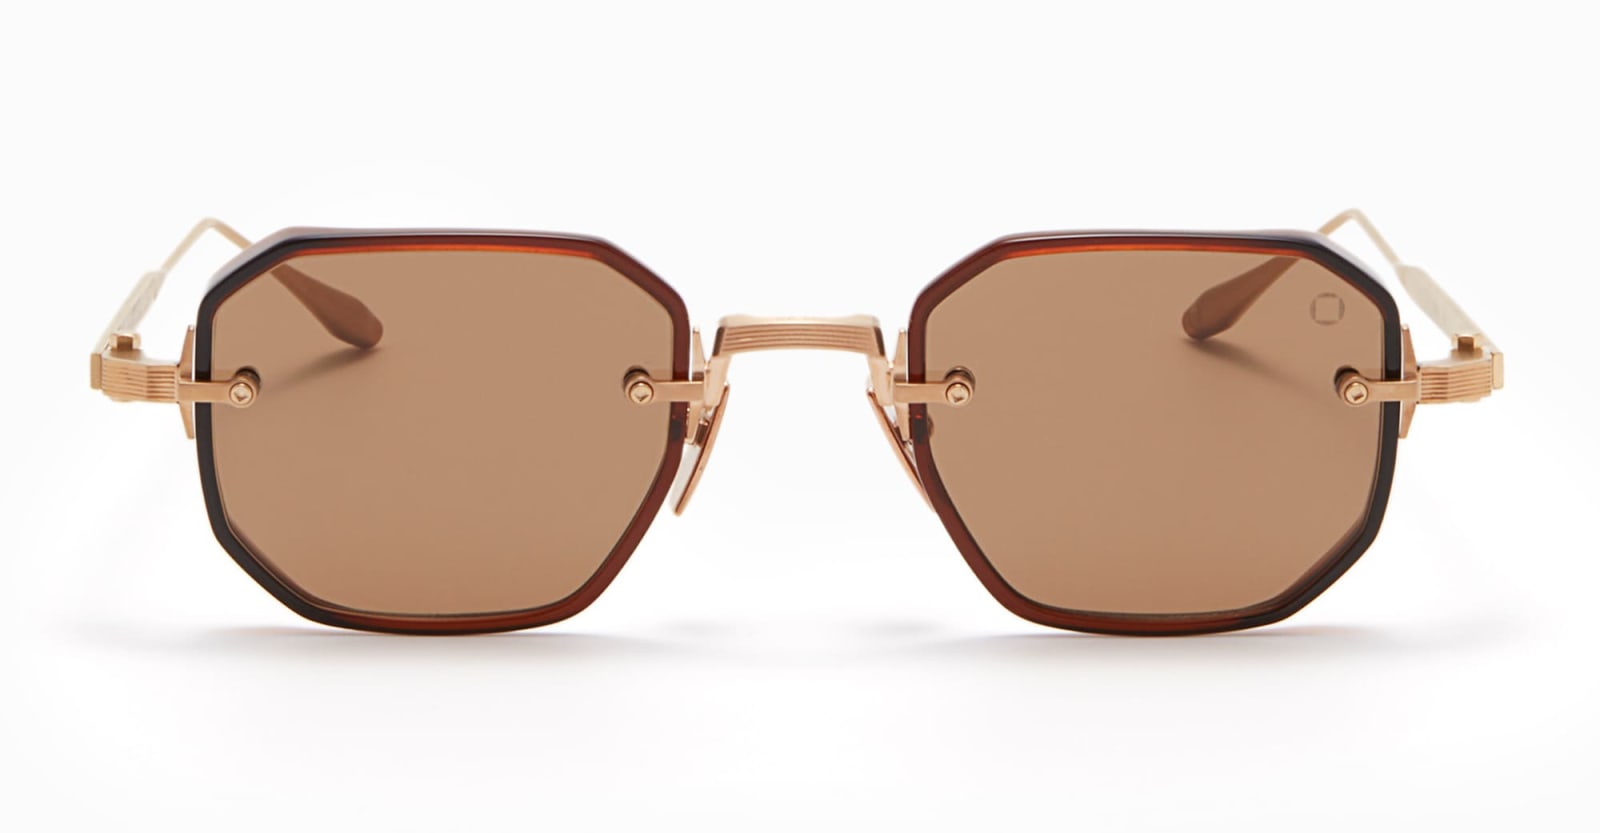 Juno-two - Brushed Gold / Brown Crystal Sunglasses